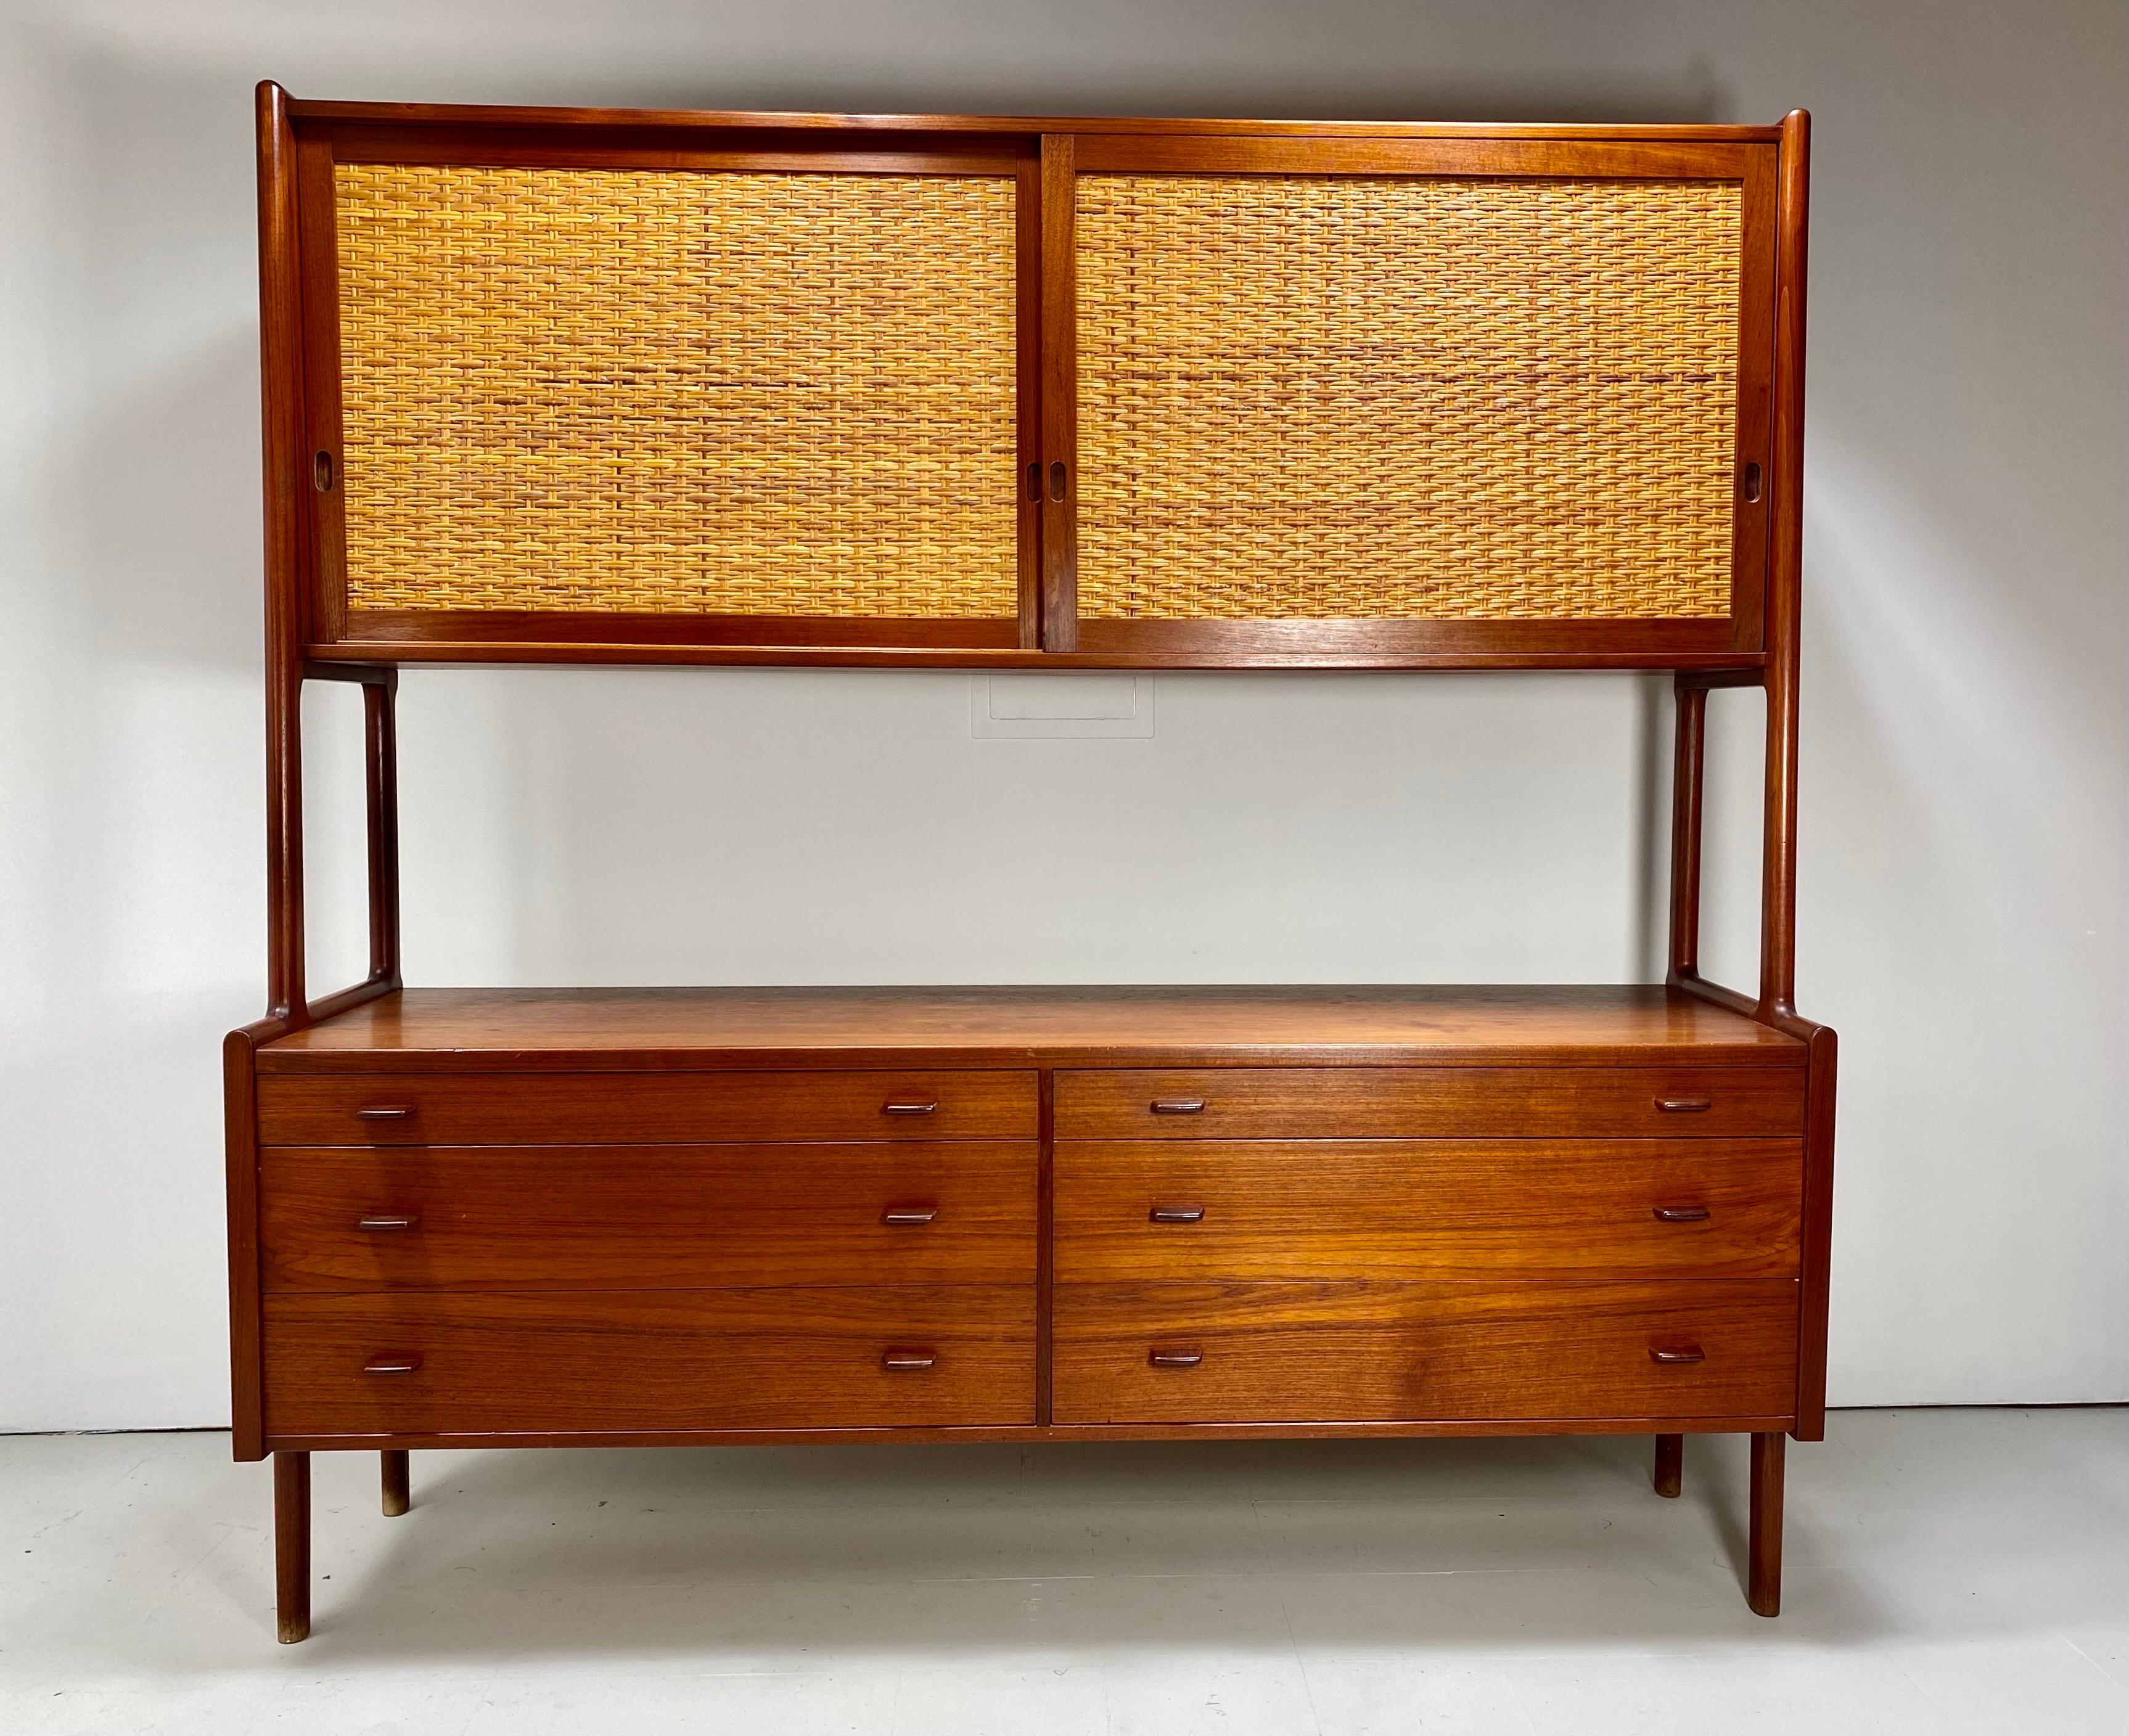 Hans Wegner teak sideboard for Ry Mobler. Model Ry-20. Cabinet has six drawers on the bottom and the top has sliding cane front doors concealing adjustable shelves. 1960s. Denmark

Delivery Available to NYC area for $475. Please inquire.